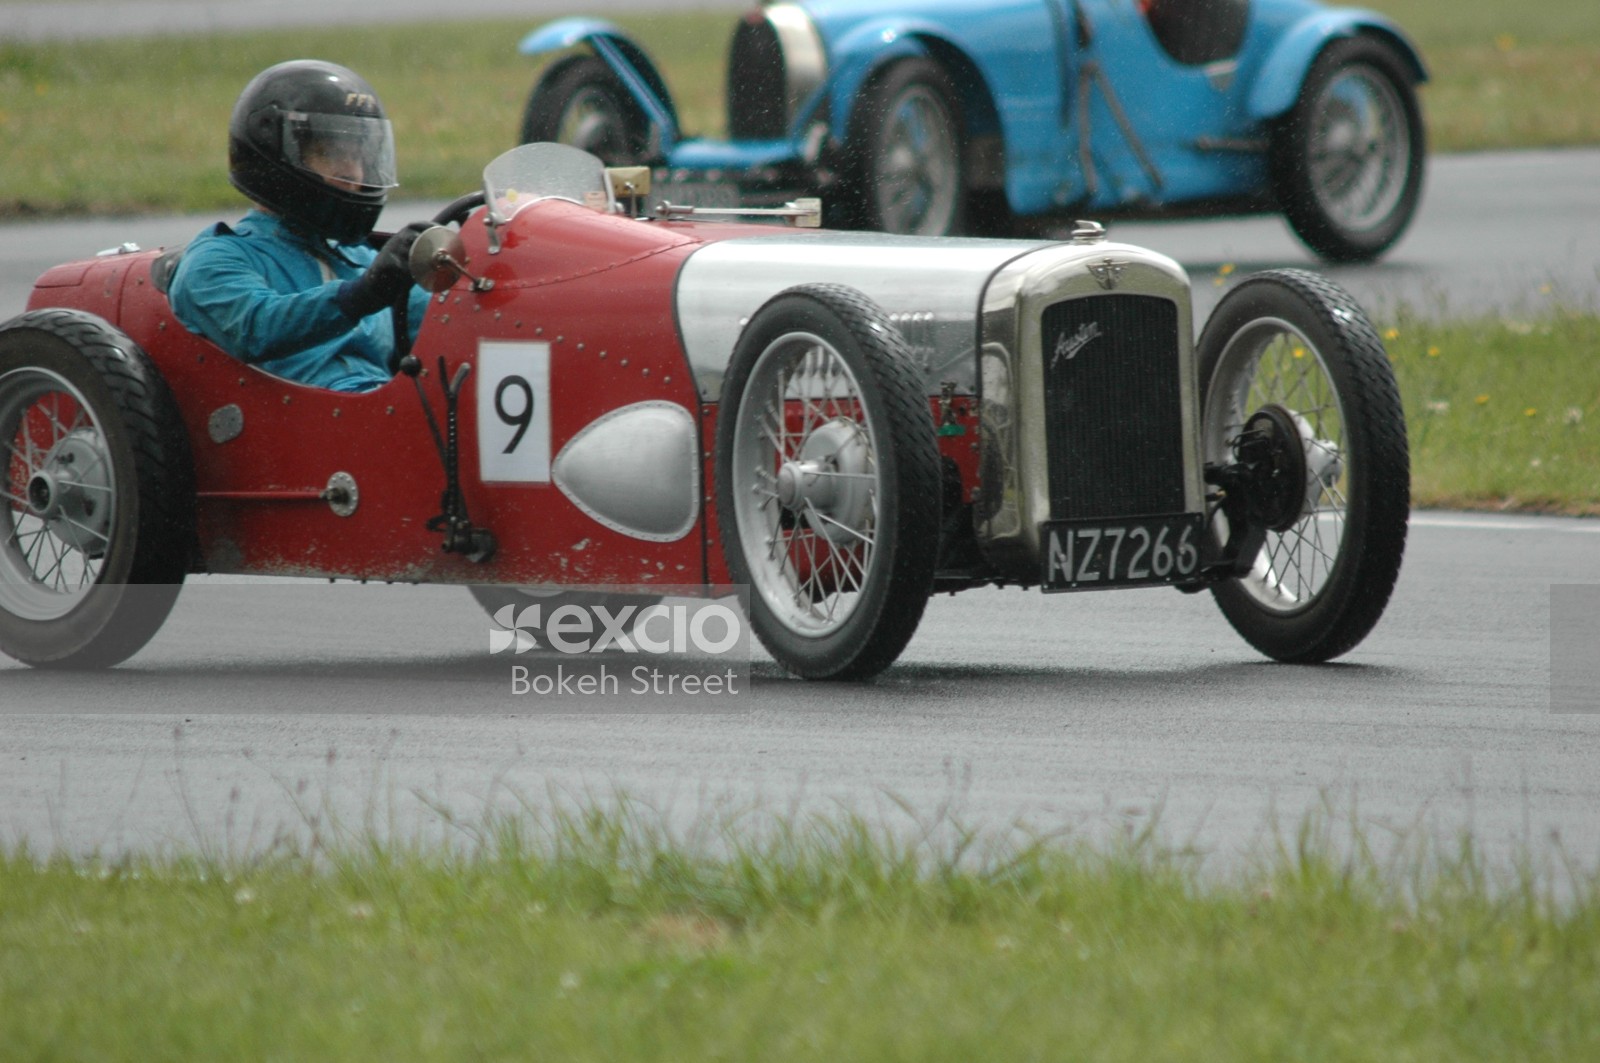 Classic red Austin Seven Special race car